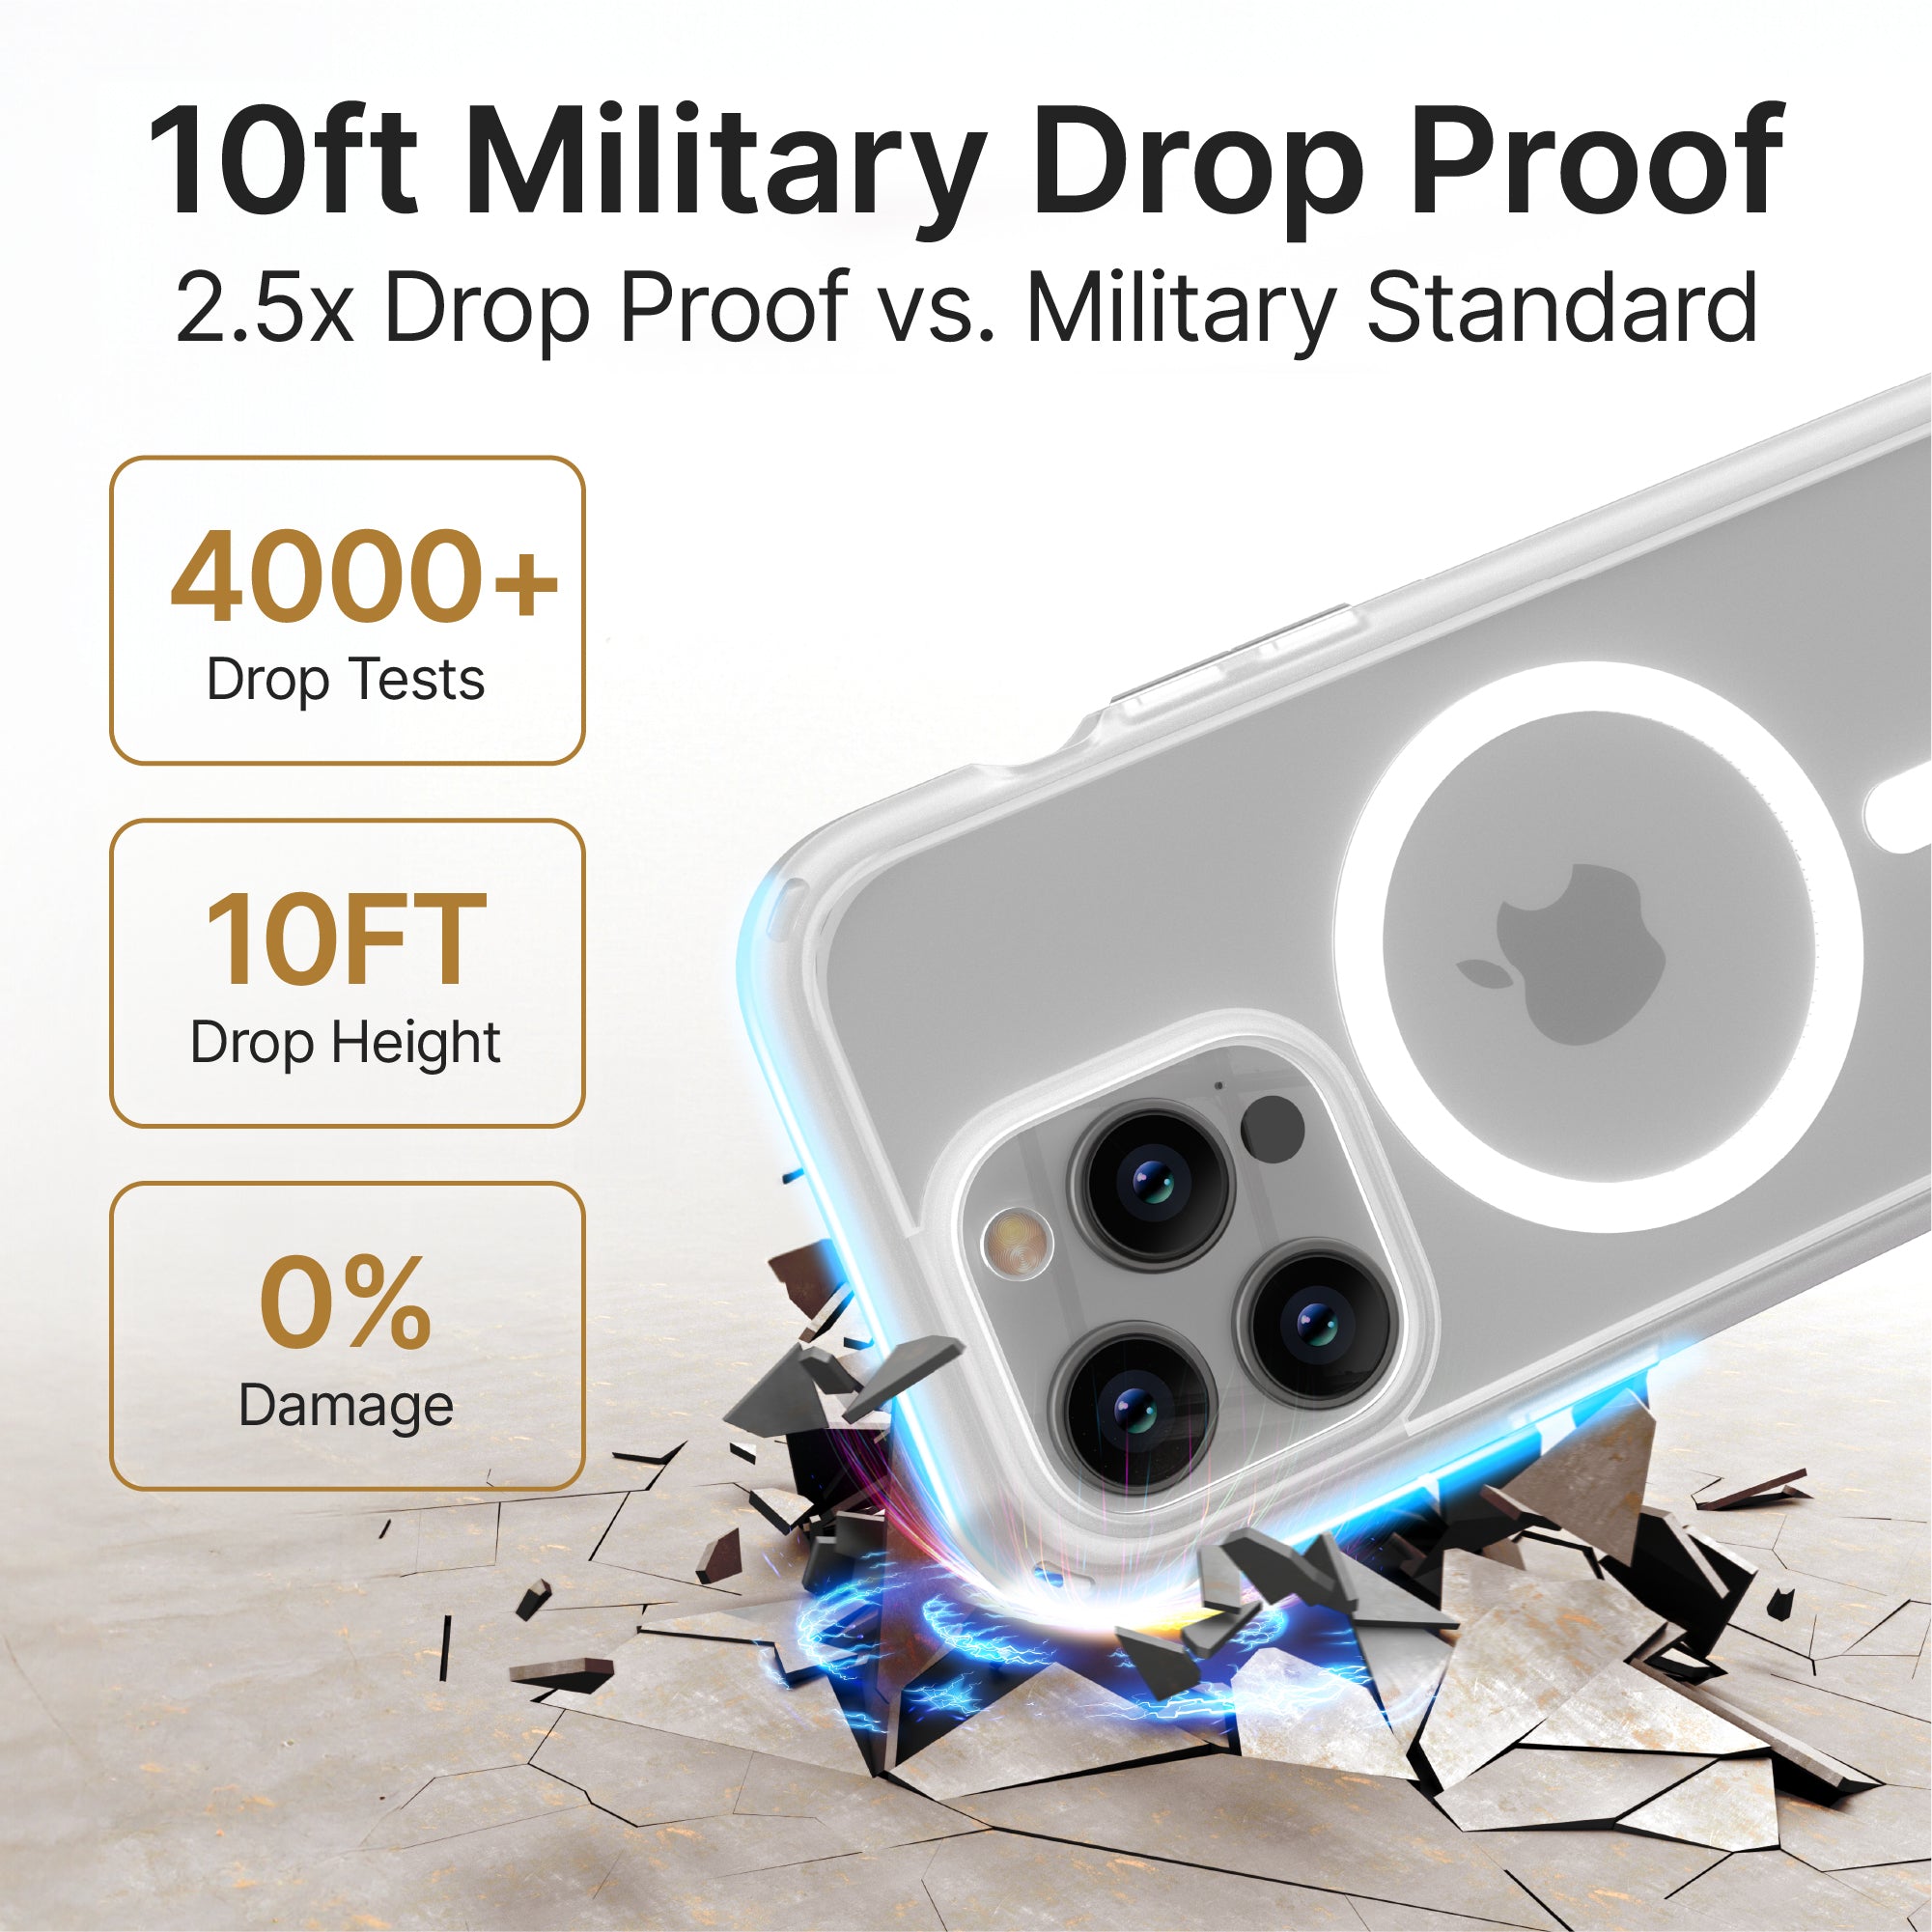 catalyst iphone 15 series influence case magsafe compatible clear for iphone 15 pro with cracked floor text reads 10ft military drop proof 2.5x drop proof vs military standard 4000+ drop tests 10ft drop height 0% damage